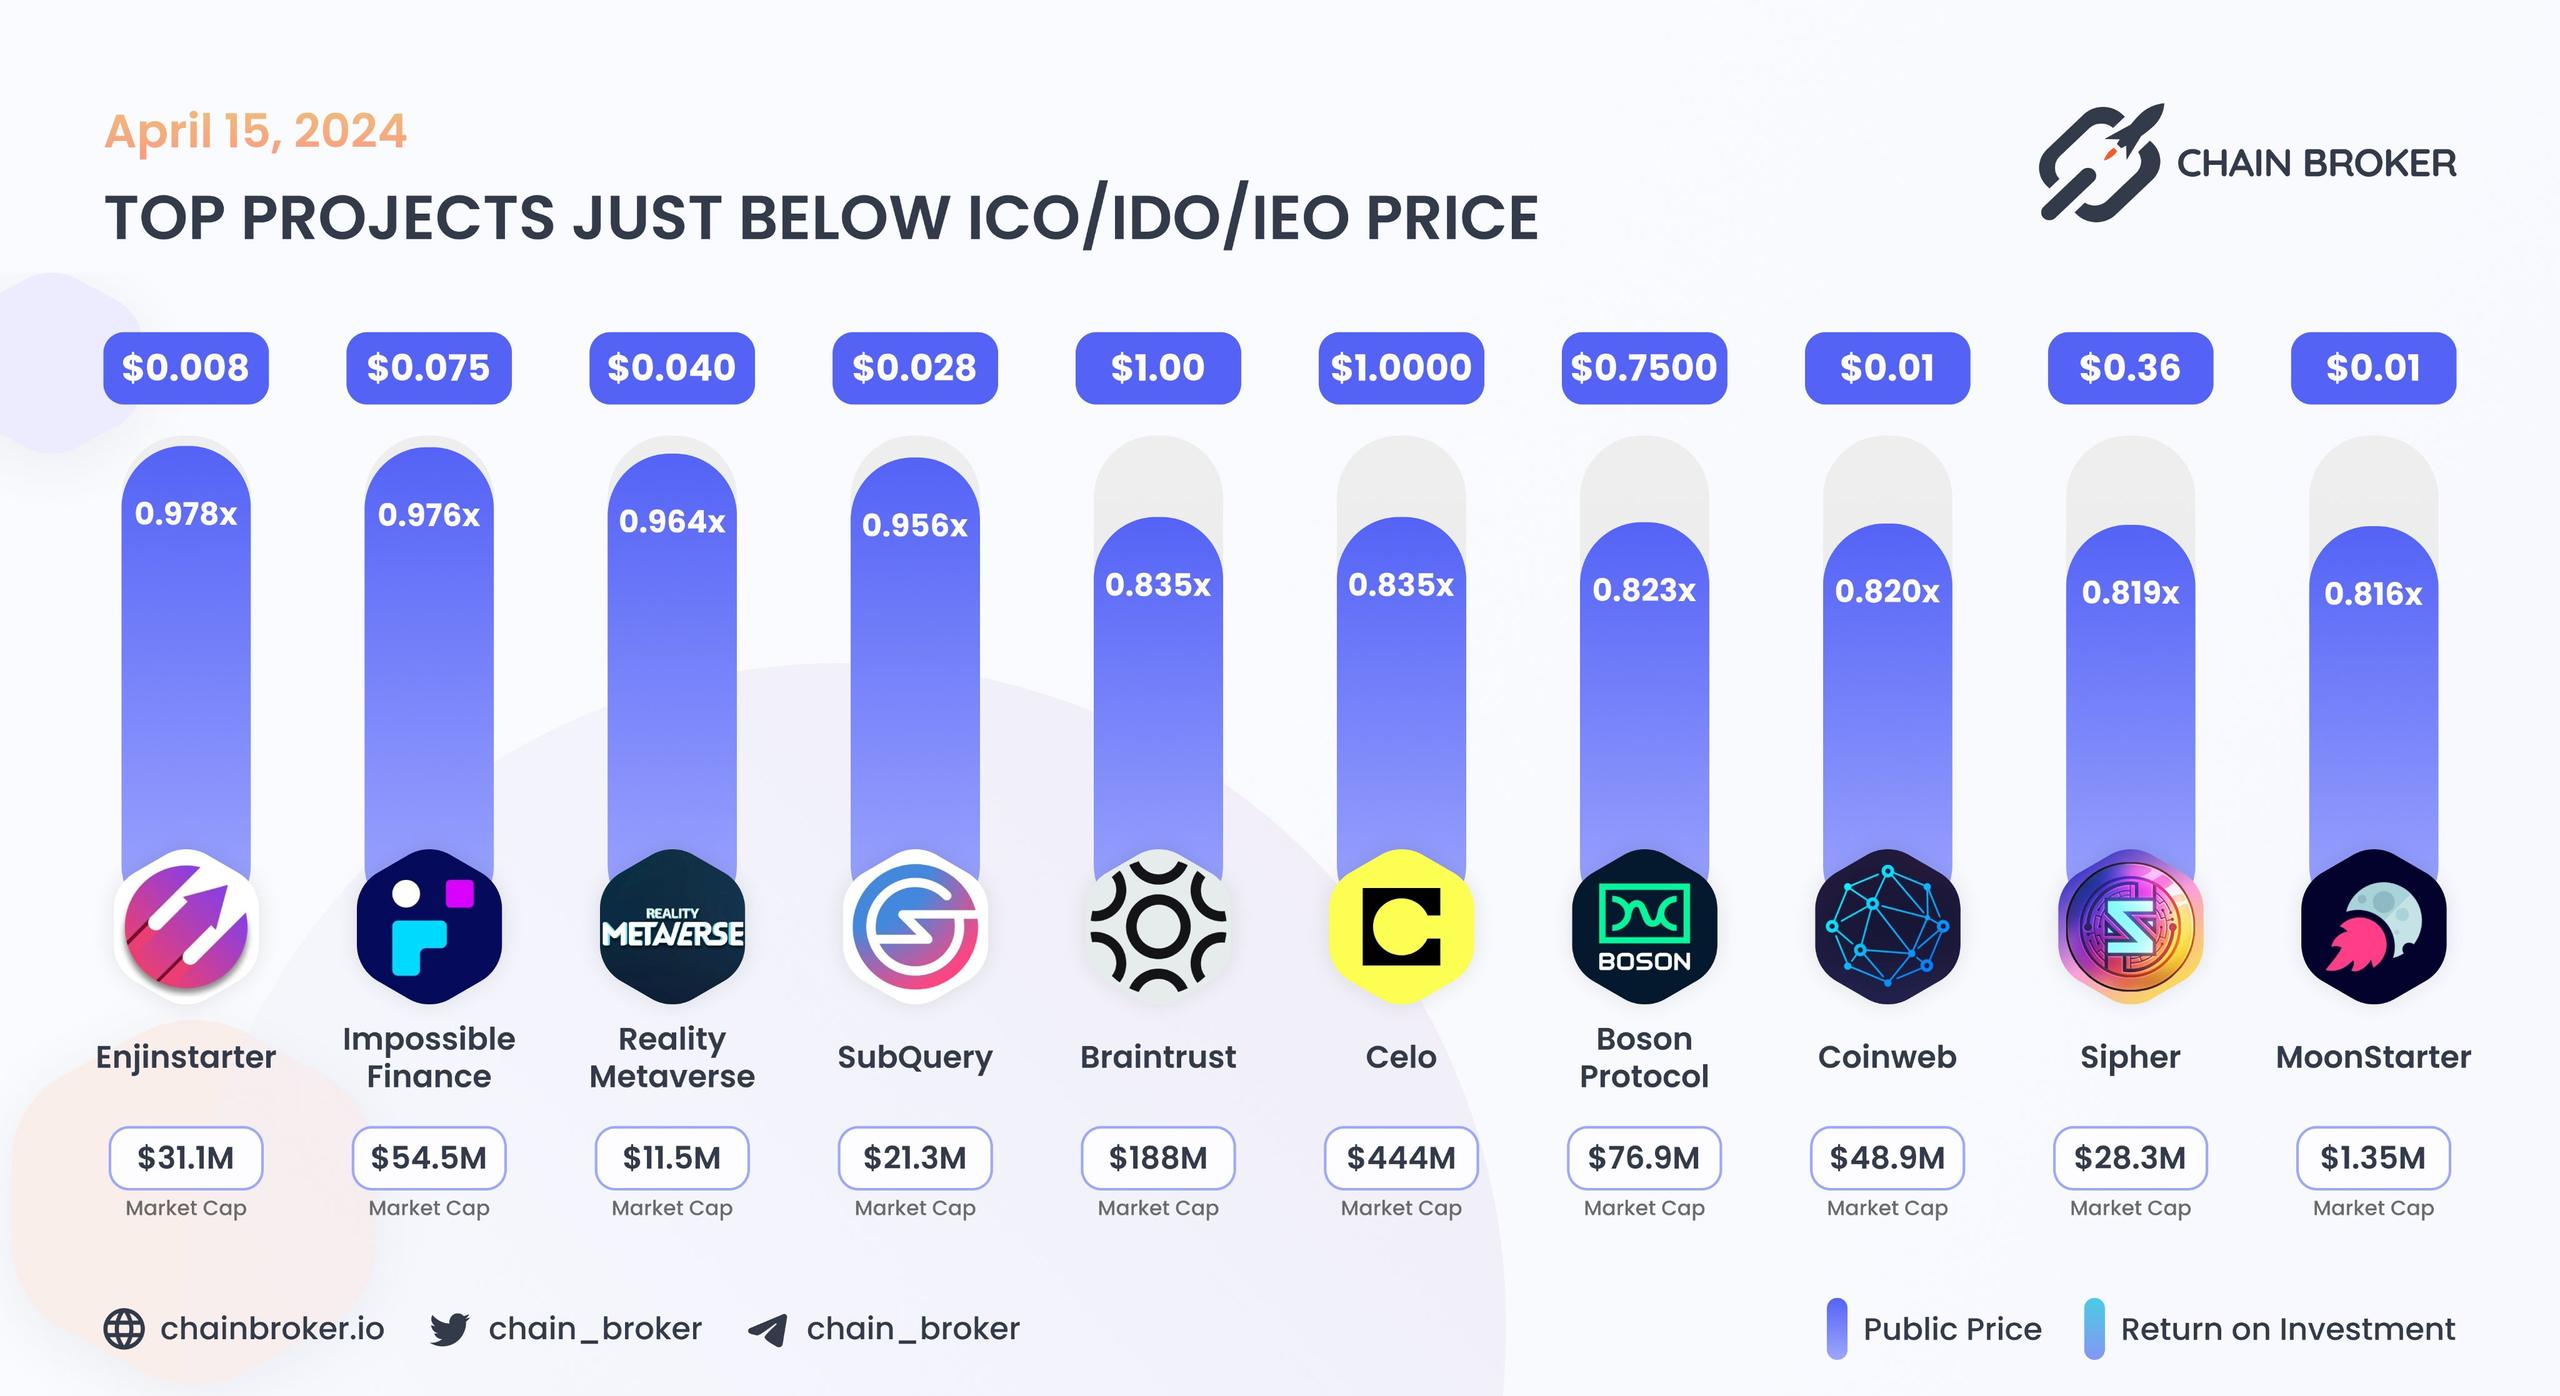 Top projects just below Public Price